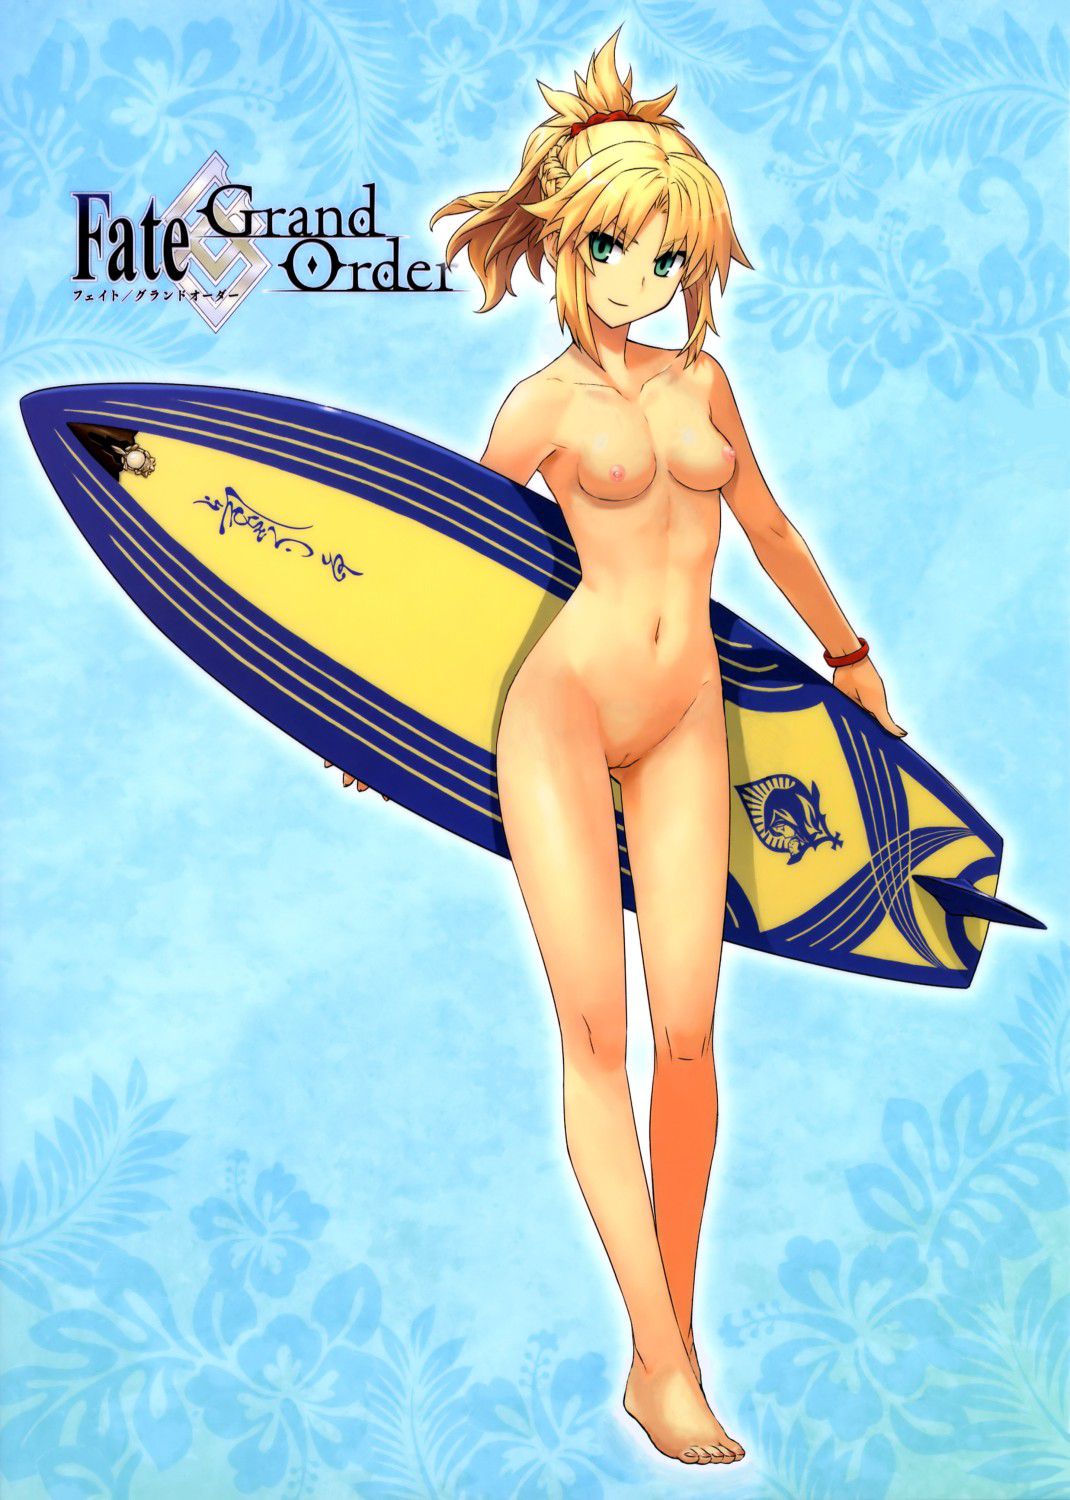 Stripped of the Fate/Grand Order (5) 1